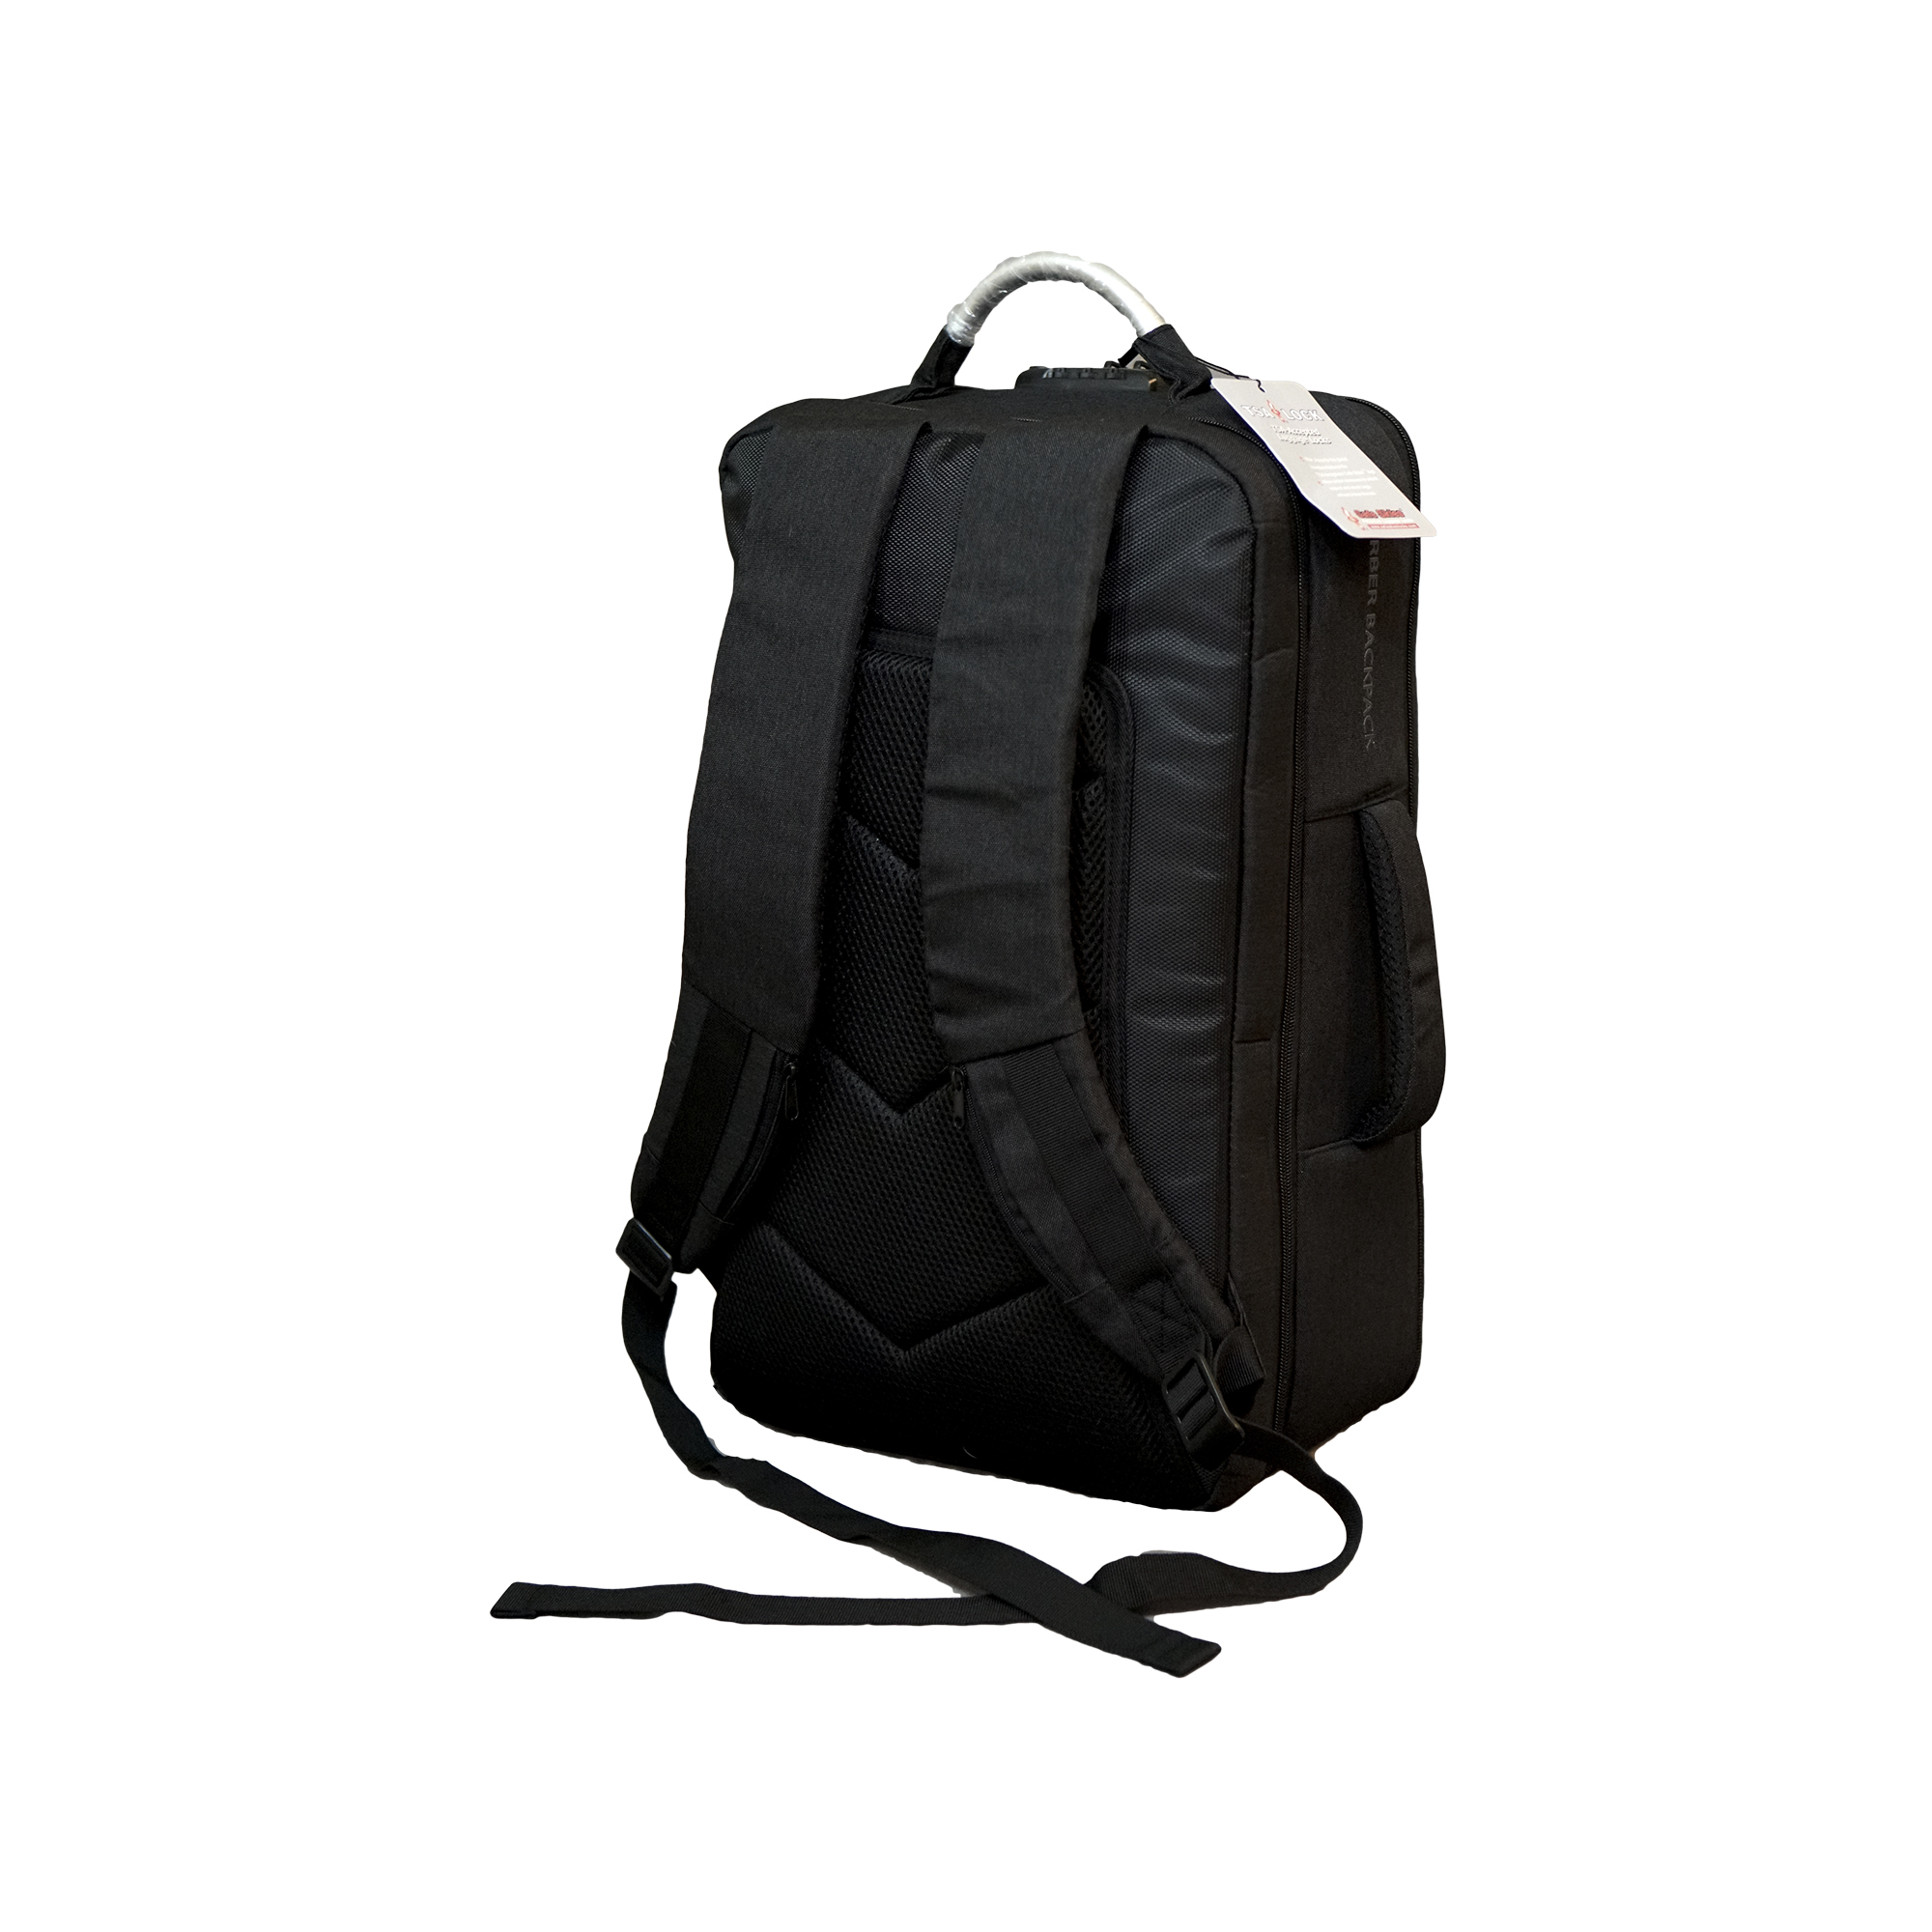 'Master' Barber Backpack - #1 Barber and Hair Stylists Bag